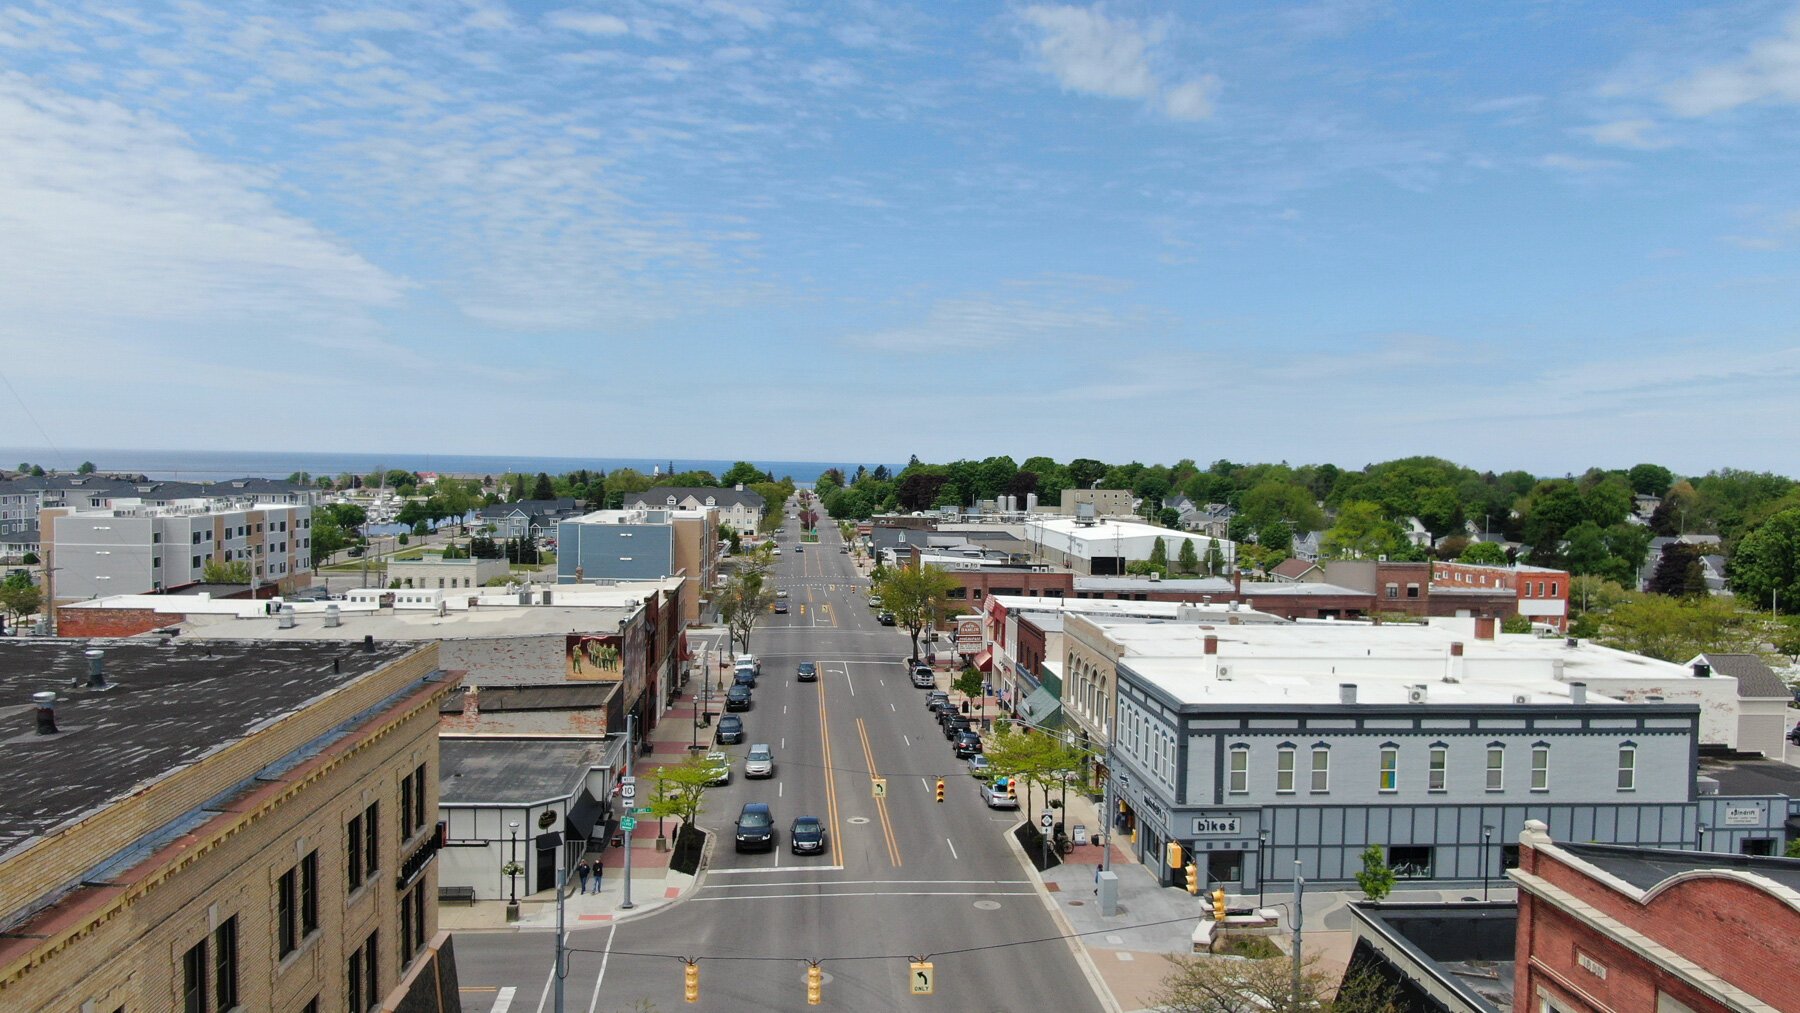 Downtown Ludington will be a flurry of activity this weekend as the city celebrates its 150th anniversary.